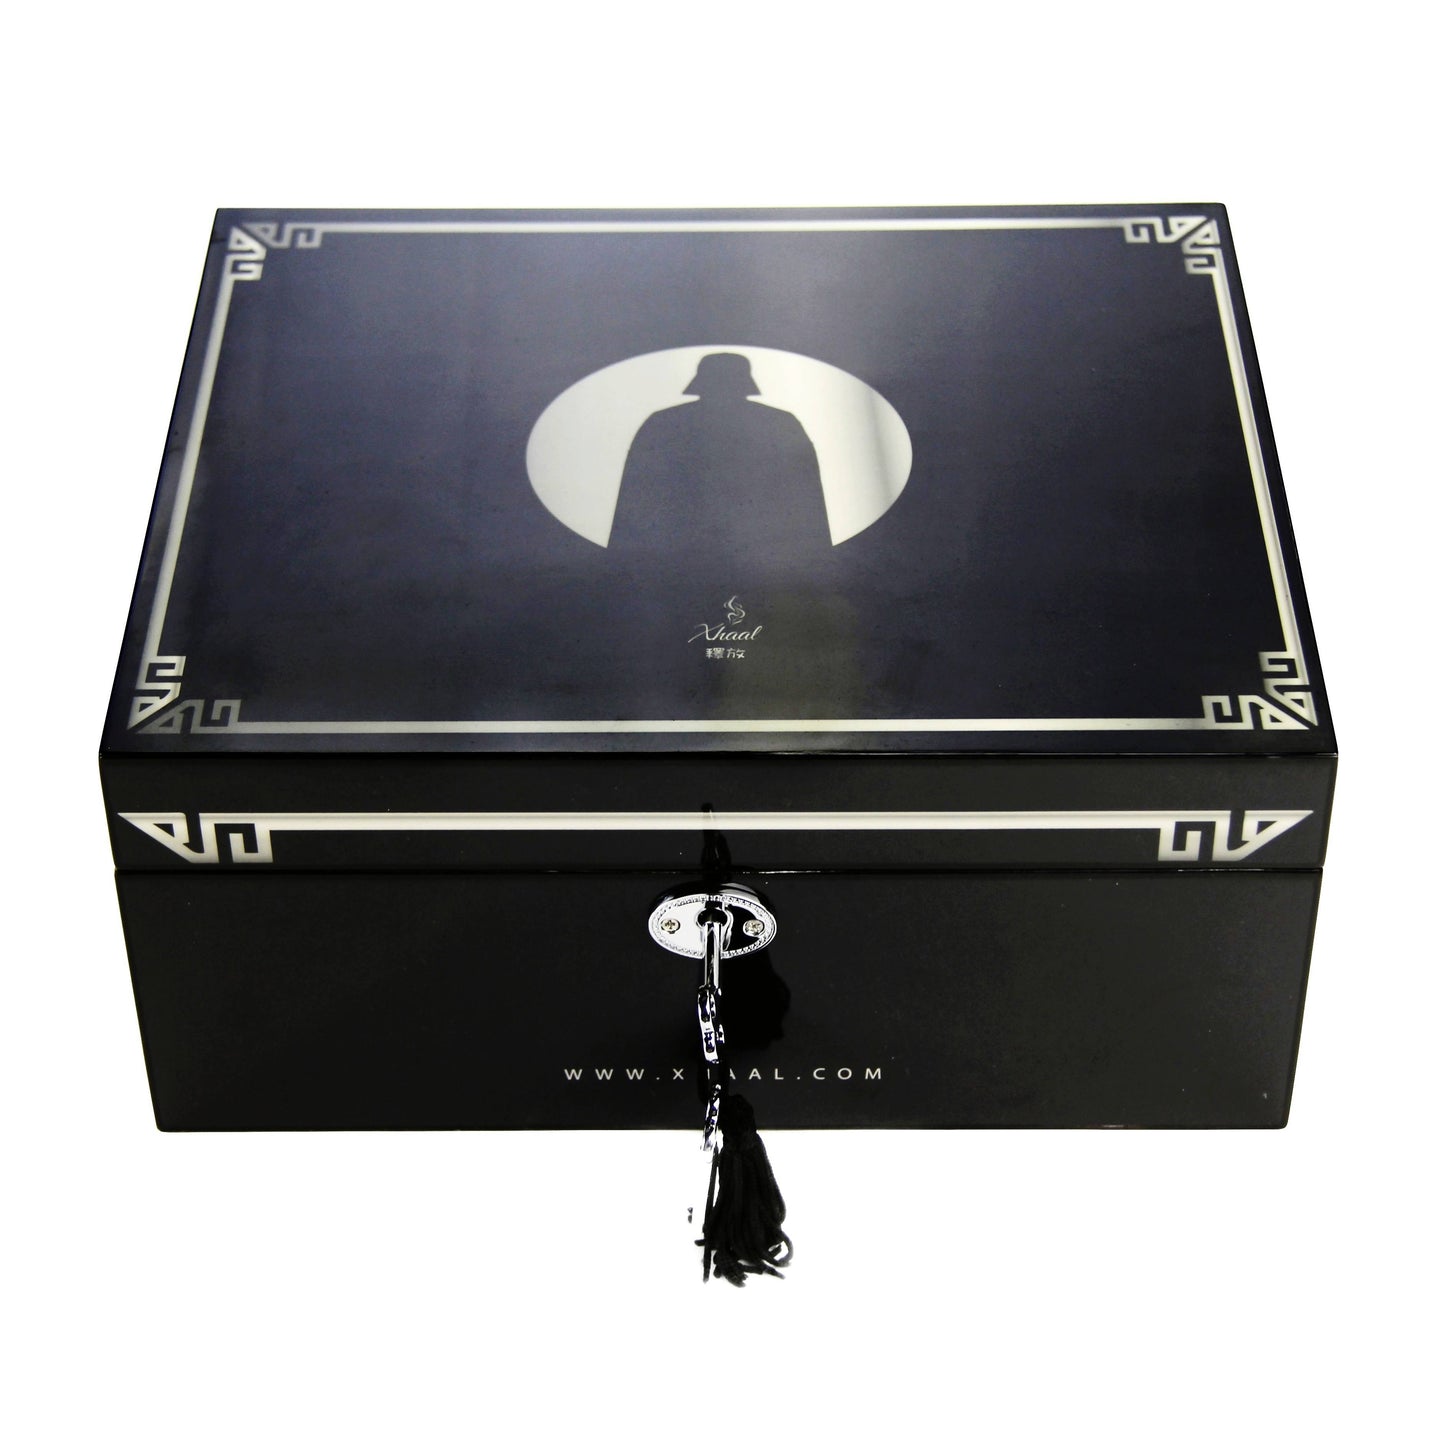 Fully Stocked Stylish Durable Black Humidor Box Flower Power Packages 